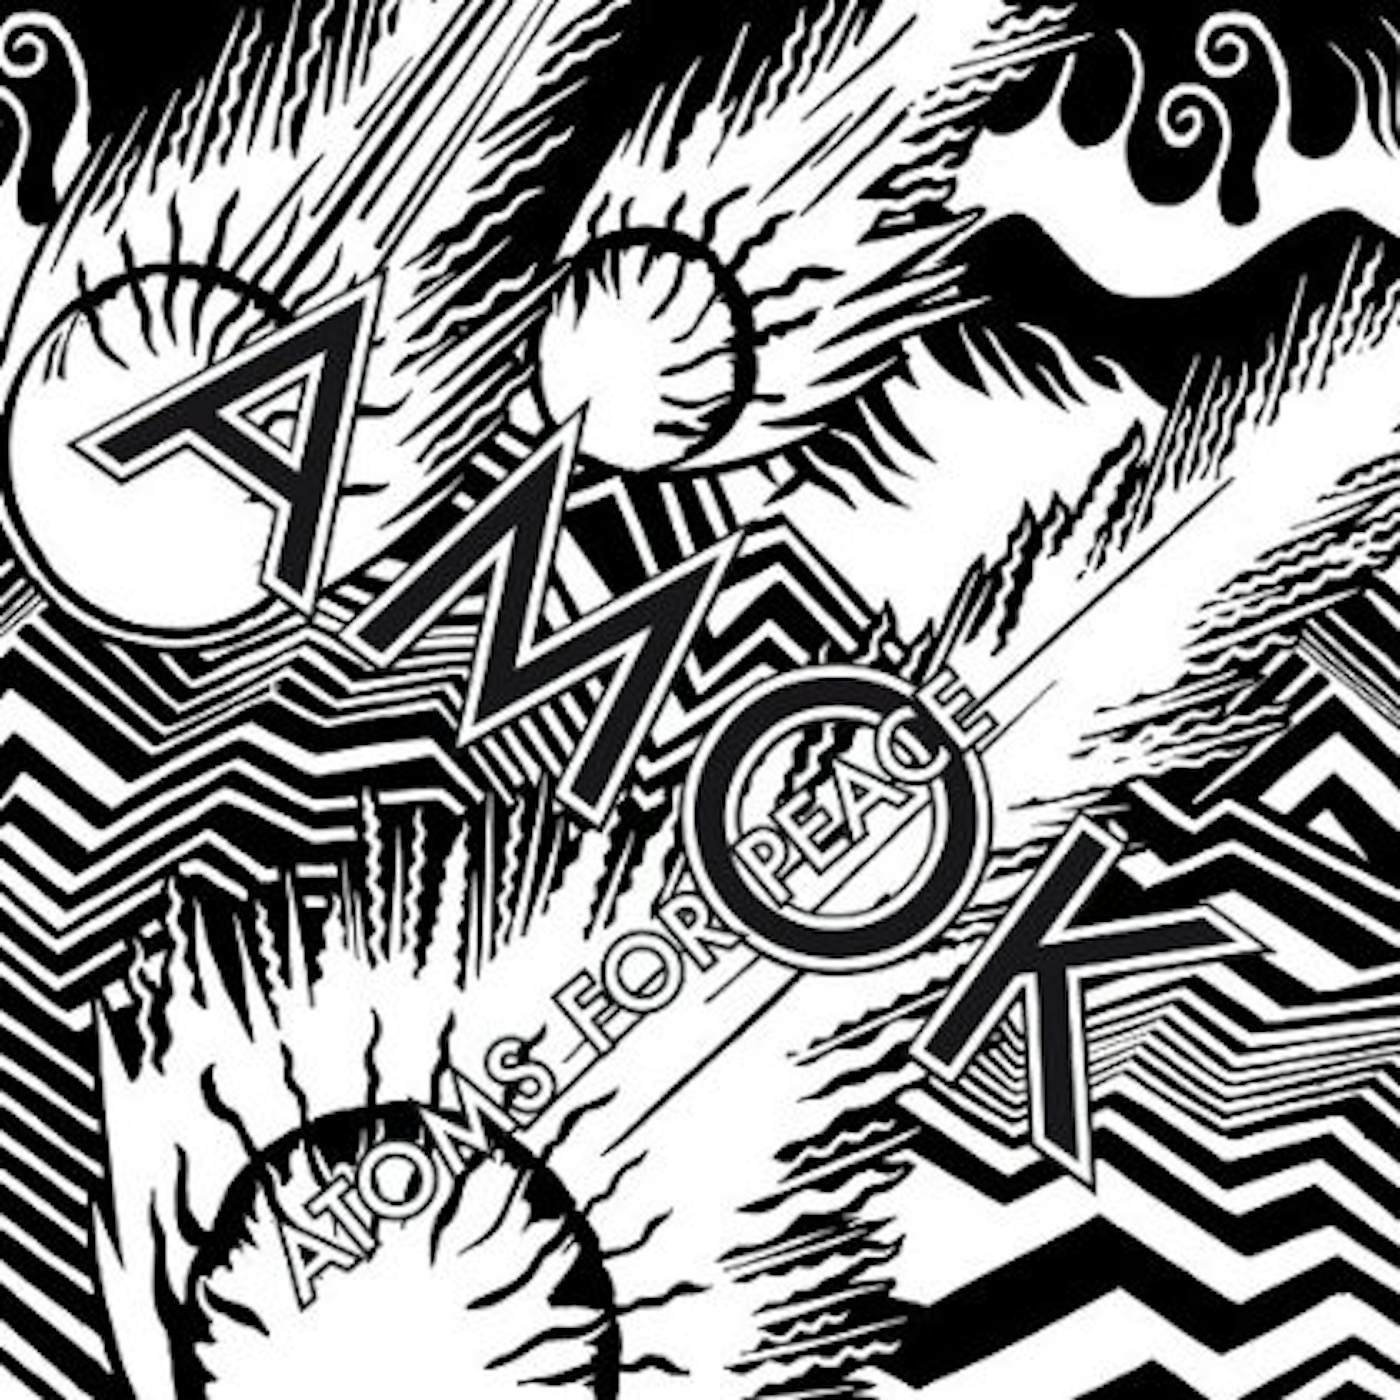 Atoms For Peace AMOK-LIMITED DELUXE EDITION (LP) Vinyl Record